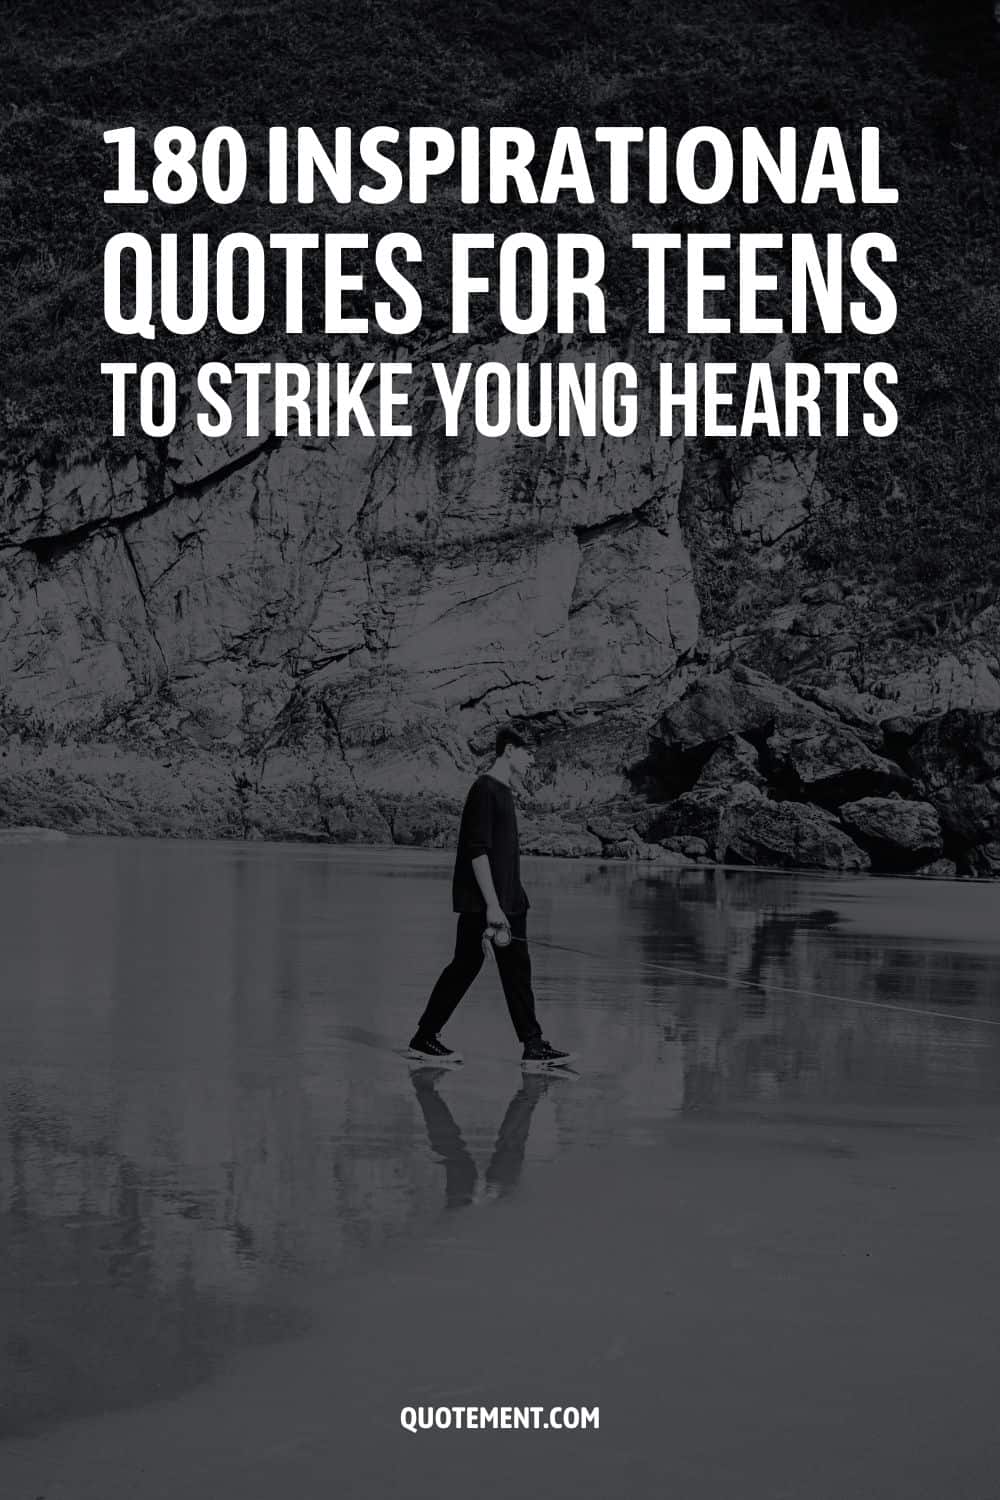 180 Inspirational Quotes For Teens To Strike Young Hearts